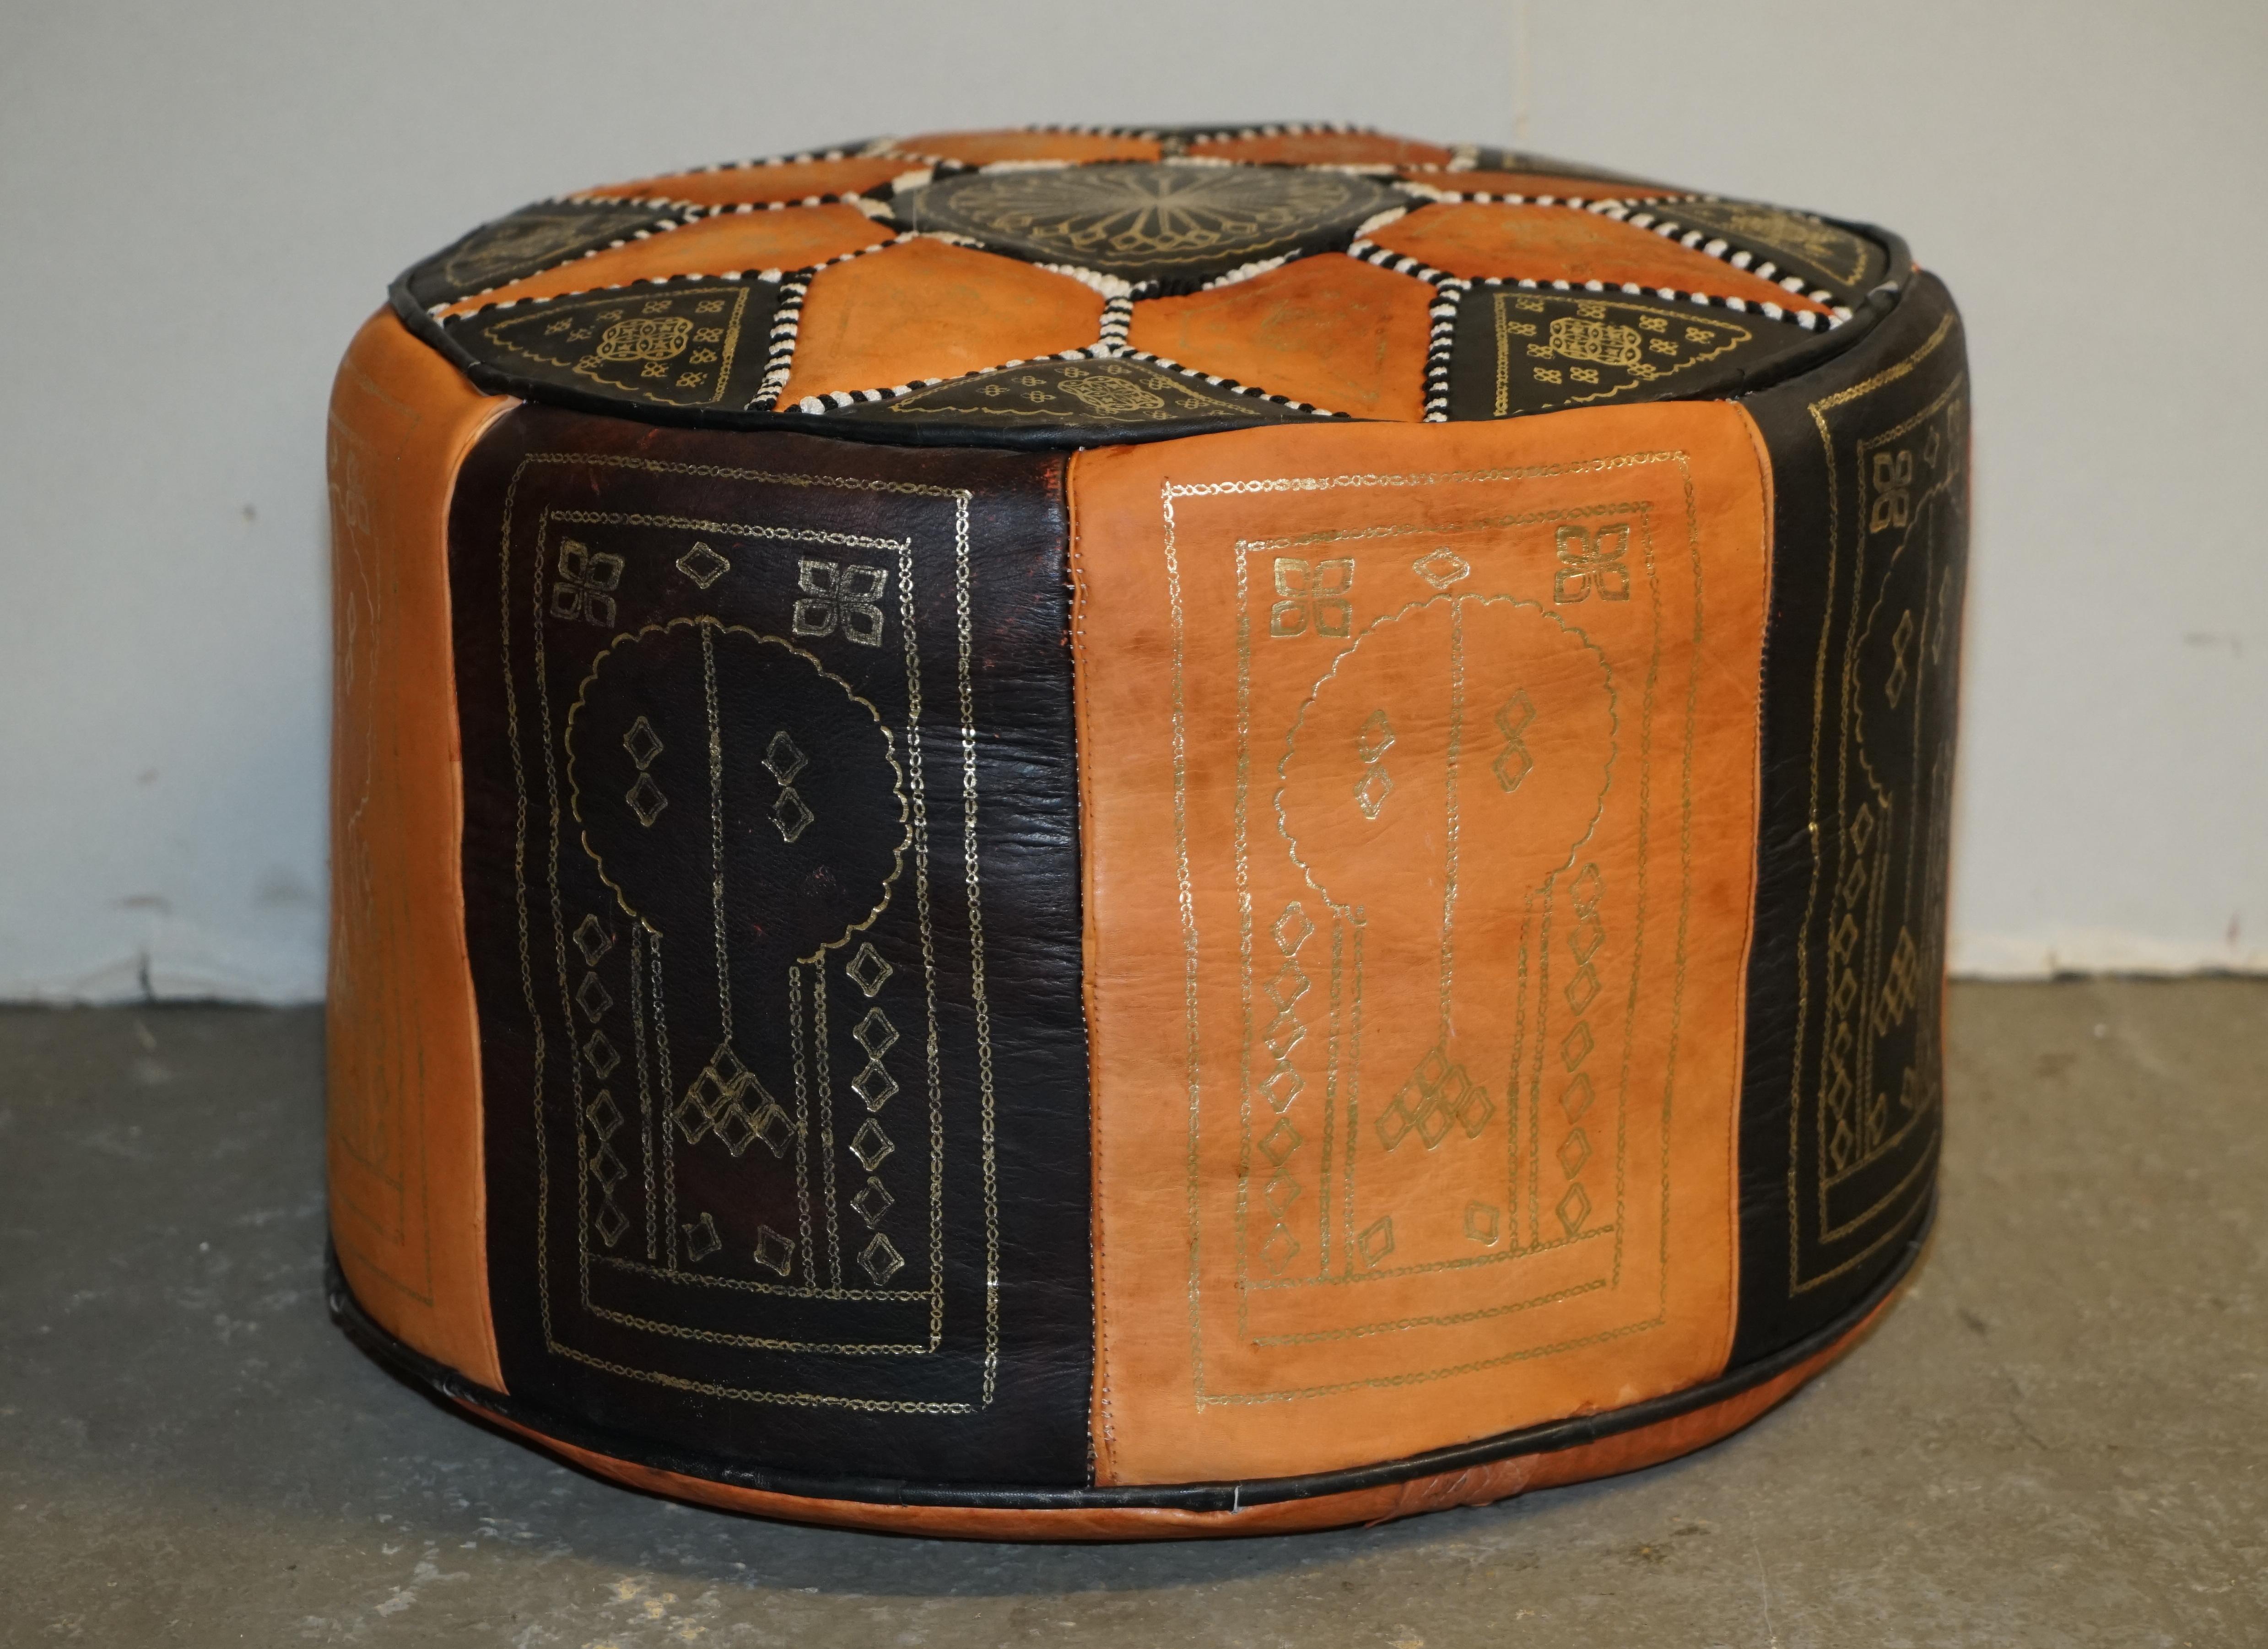 Here we have for sale this lovely vintage Mid-Century Modern leather patch work footstool pouffe.

This Pouffe screams mid century cool and would look fabulous in a multitude of settings, it’s in very good condition and ready for its new